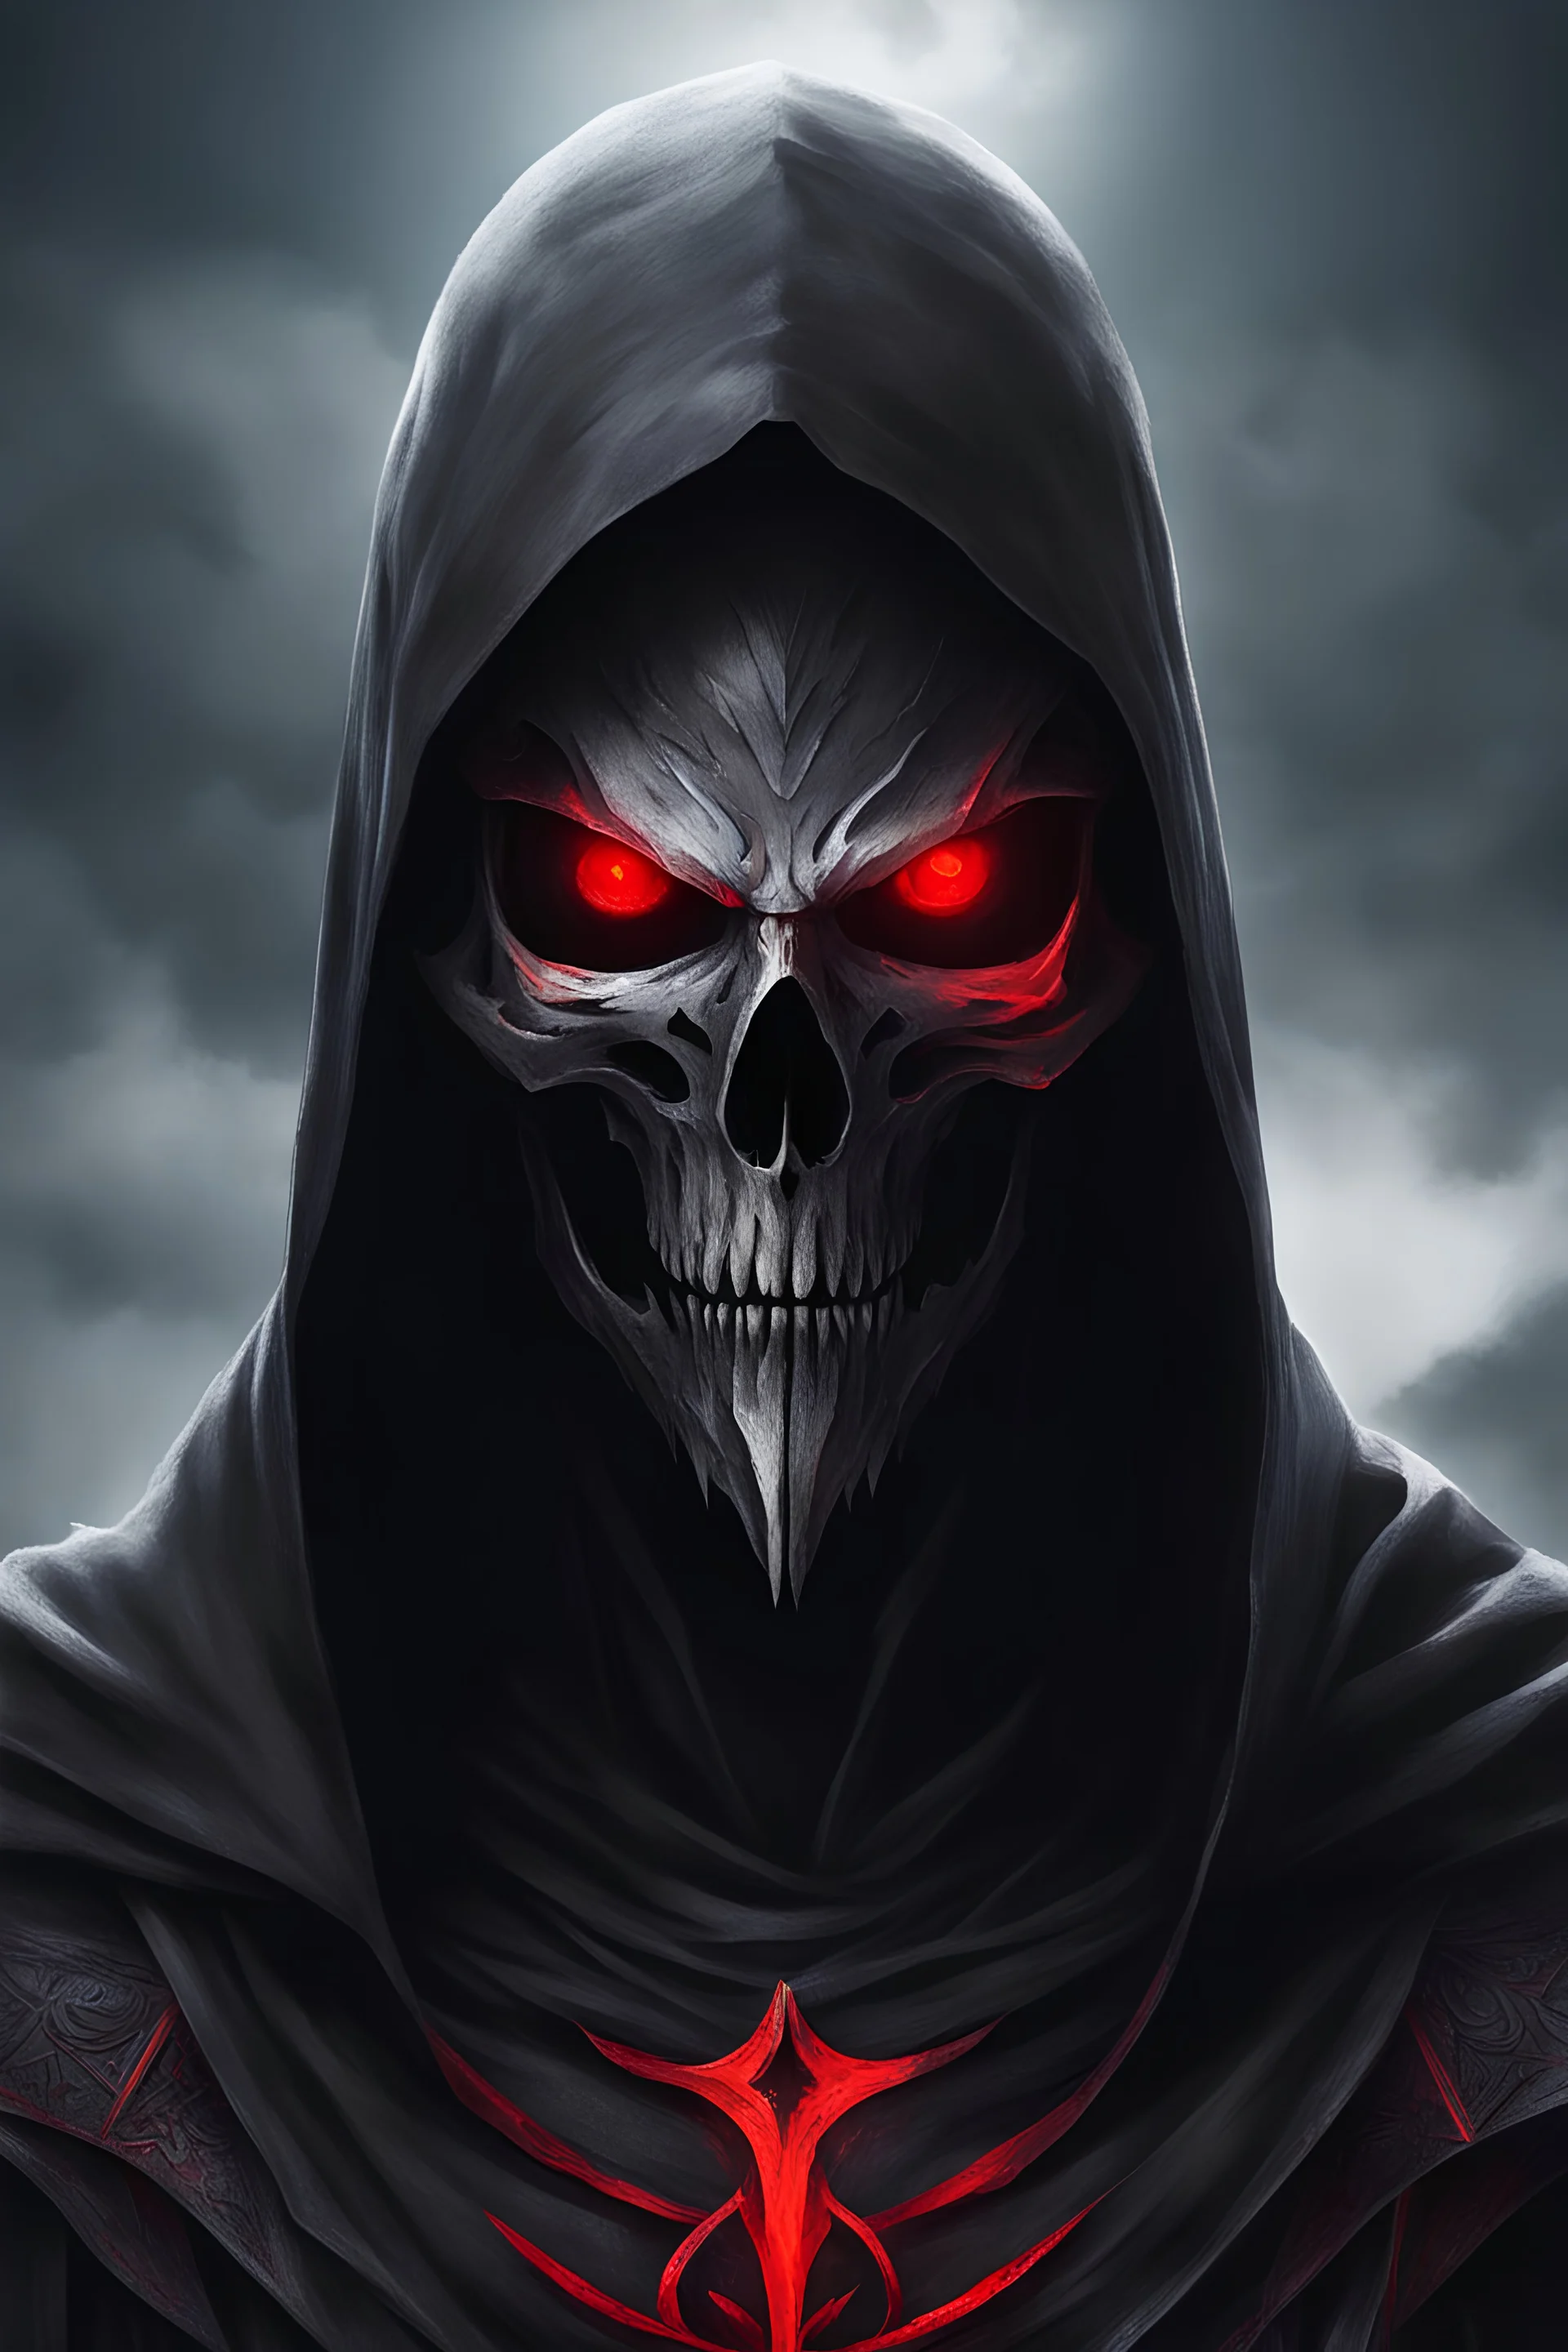 God of death looking like reaper make it darker, face with red eyes with voice of metal type Metal until death and beyond, till the end of forever